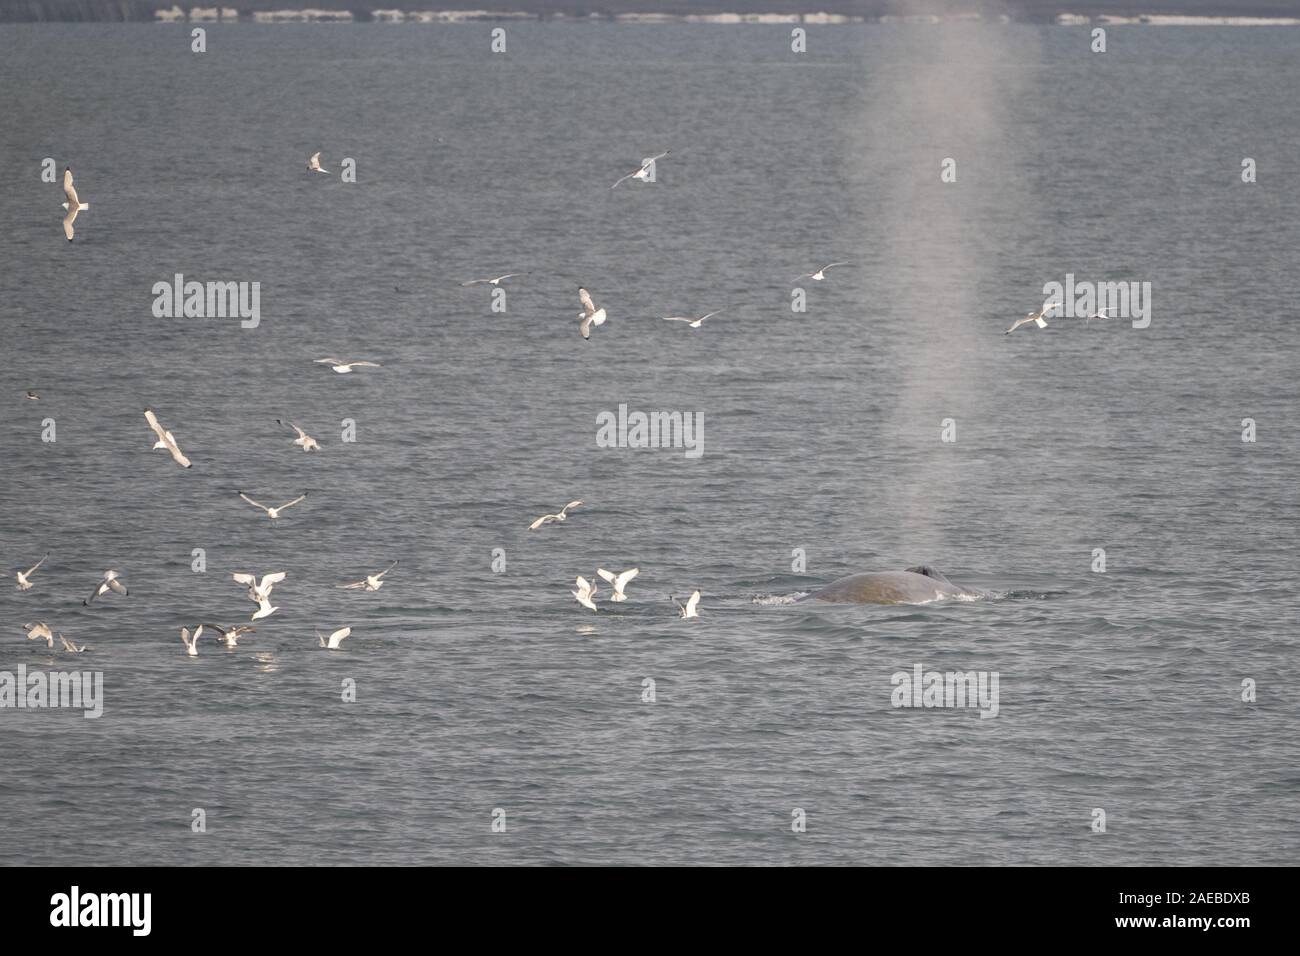 Blue Whale (Balaenoptera musculus) in the waters of Svalbard Arctic Norway Stock Photo